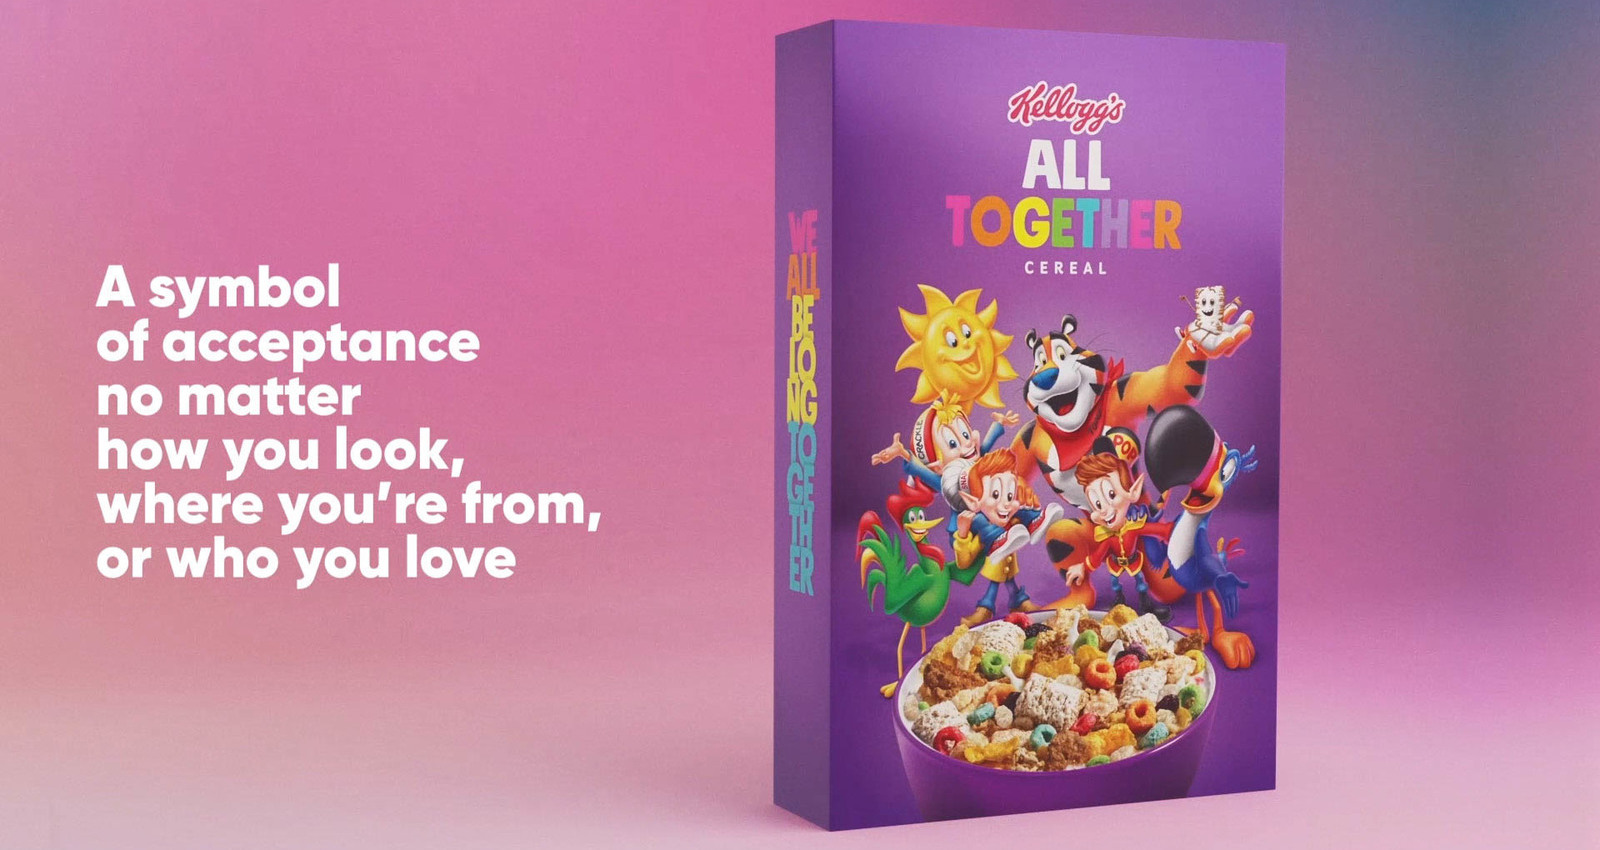 All Together Cereal